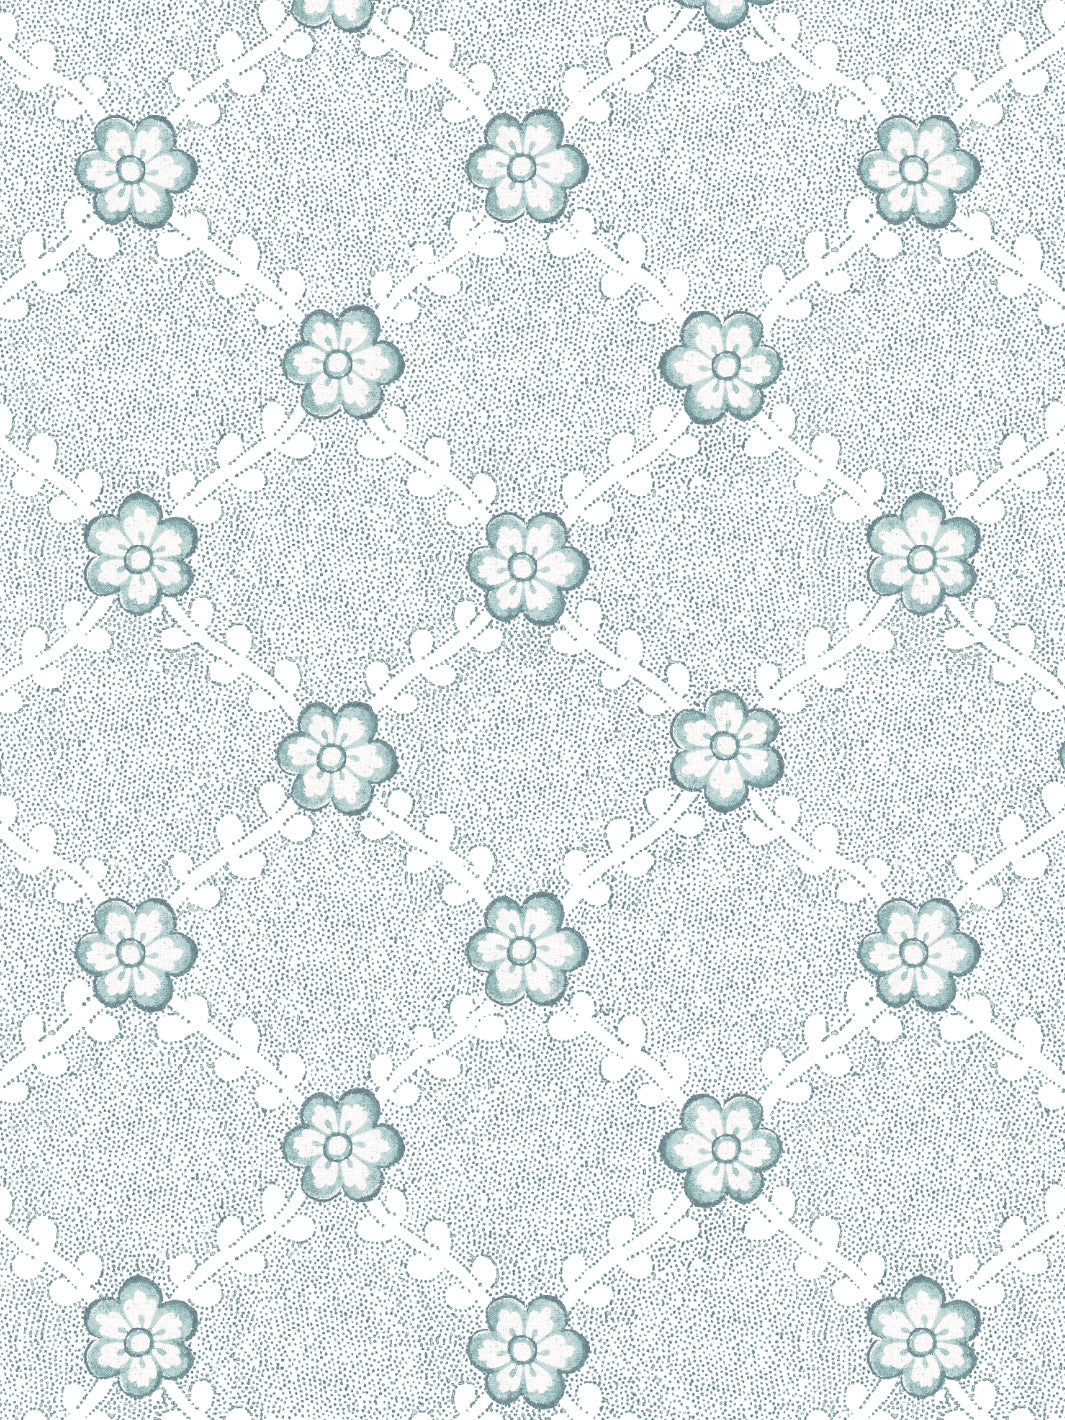 'Lucia' Wallpaper by Nathan Turner - Seafoam